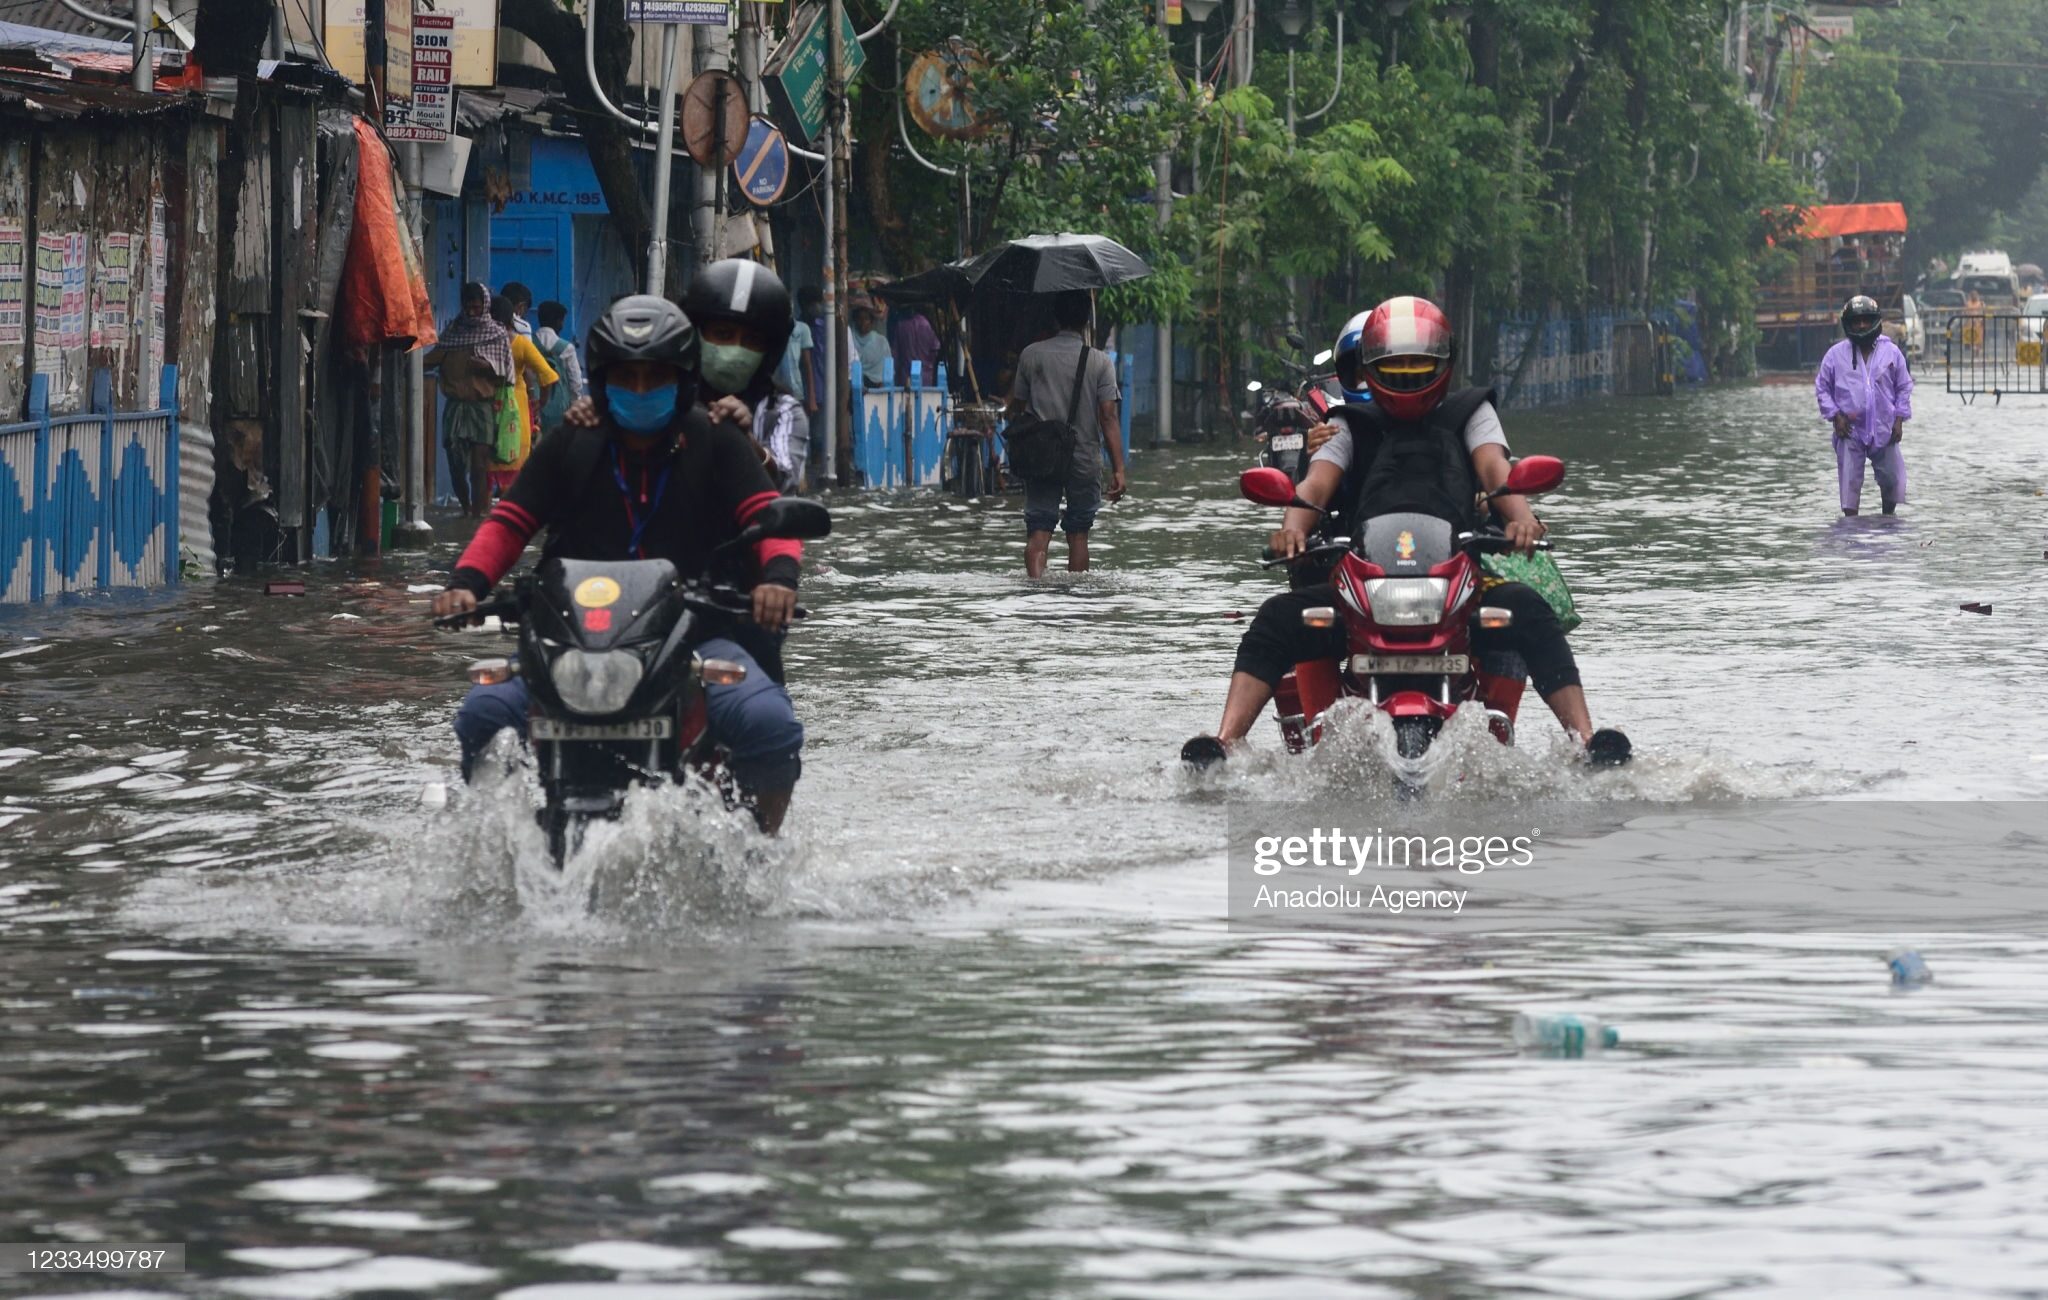 Heavy monsoon rains cause floods in several parts of Kolkata, West Bengal, India on June 17, 2021